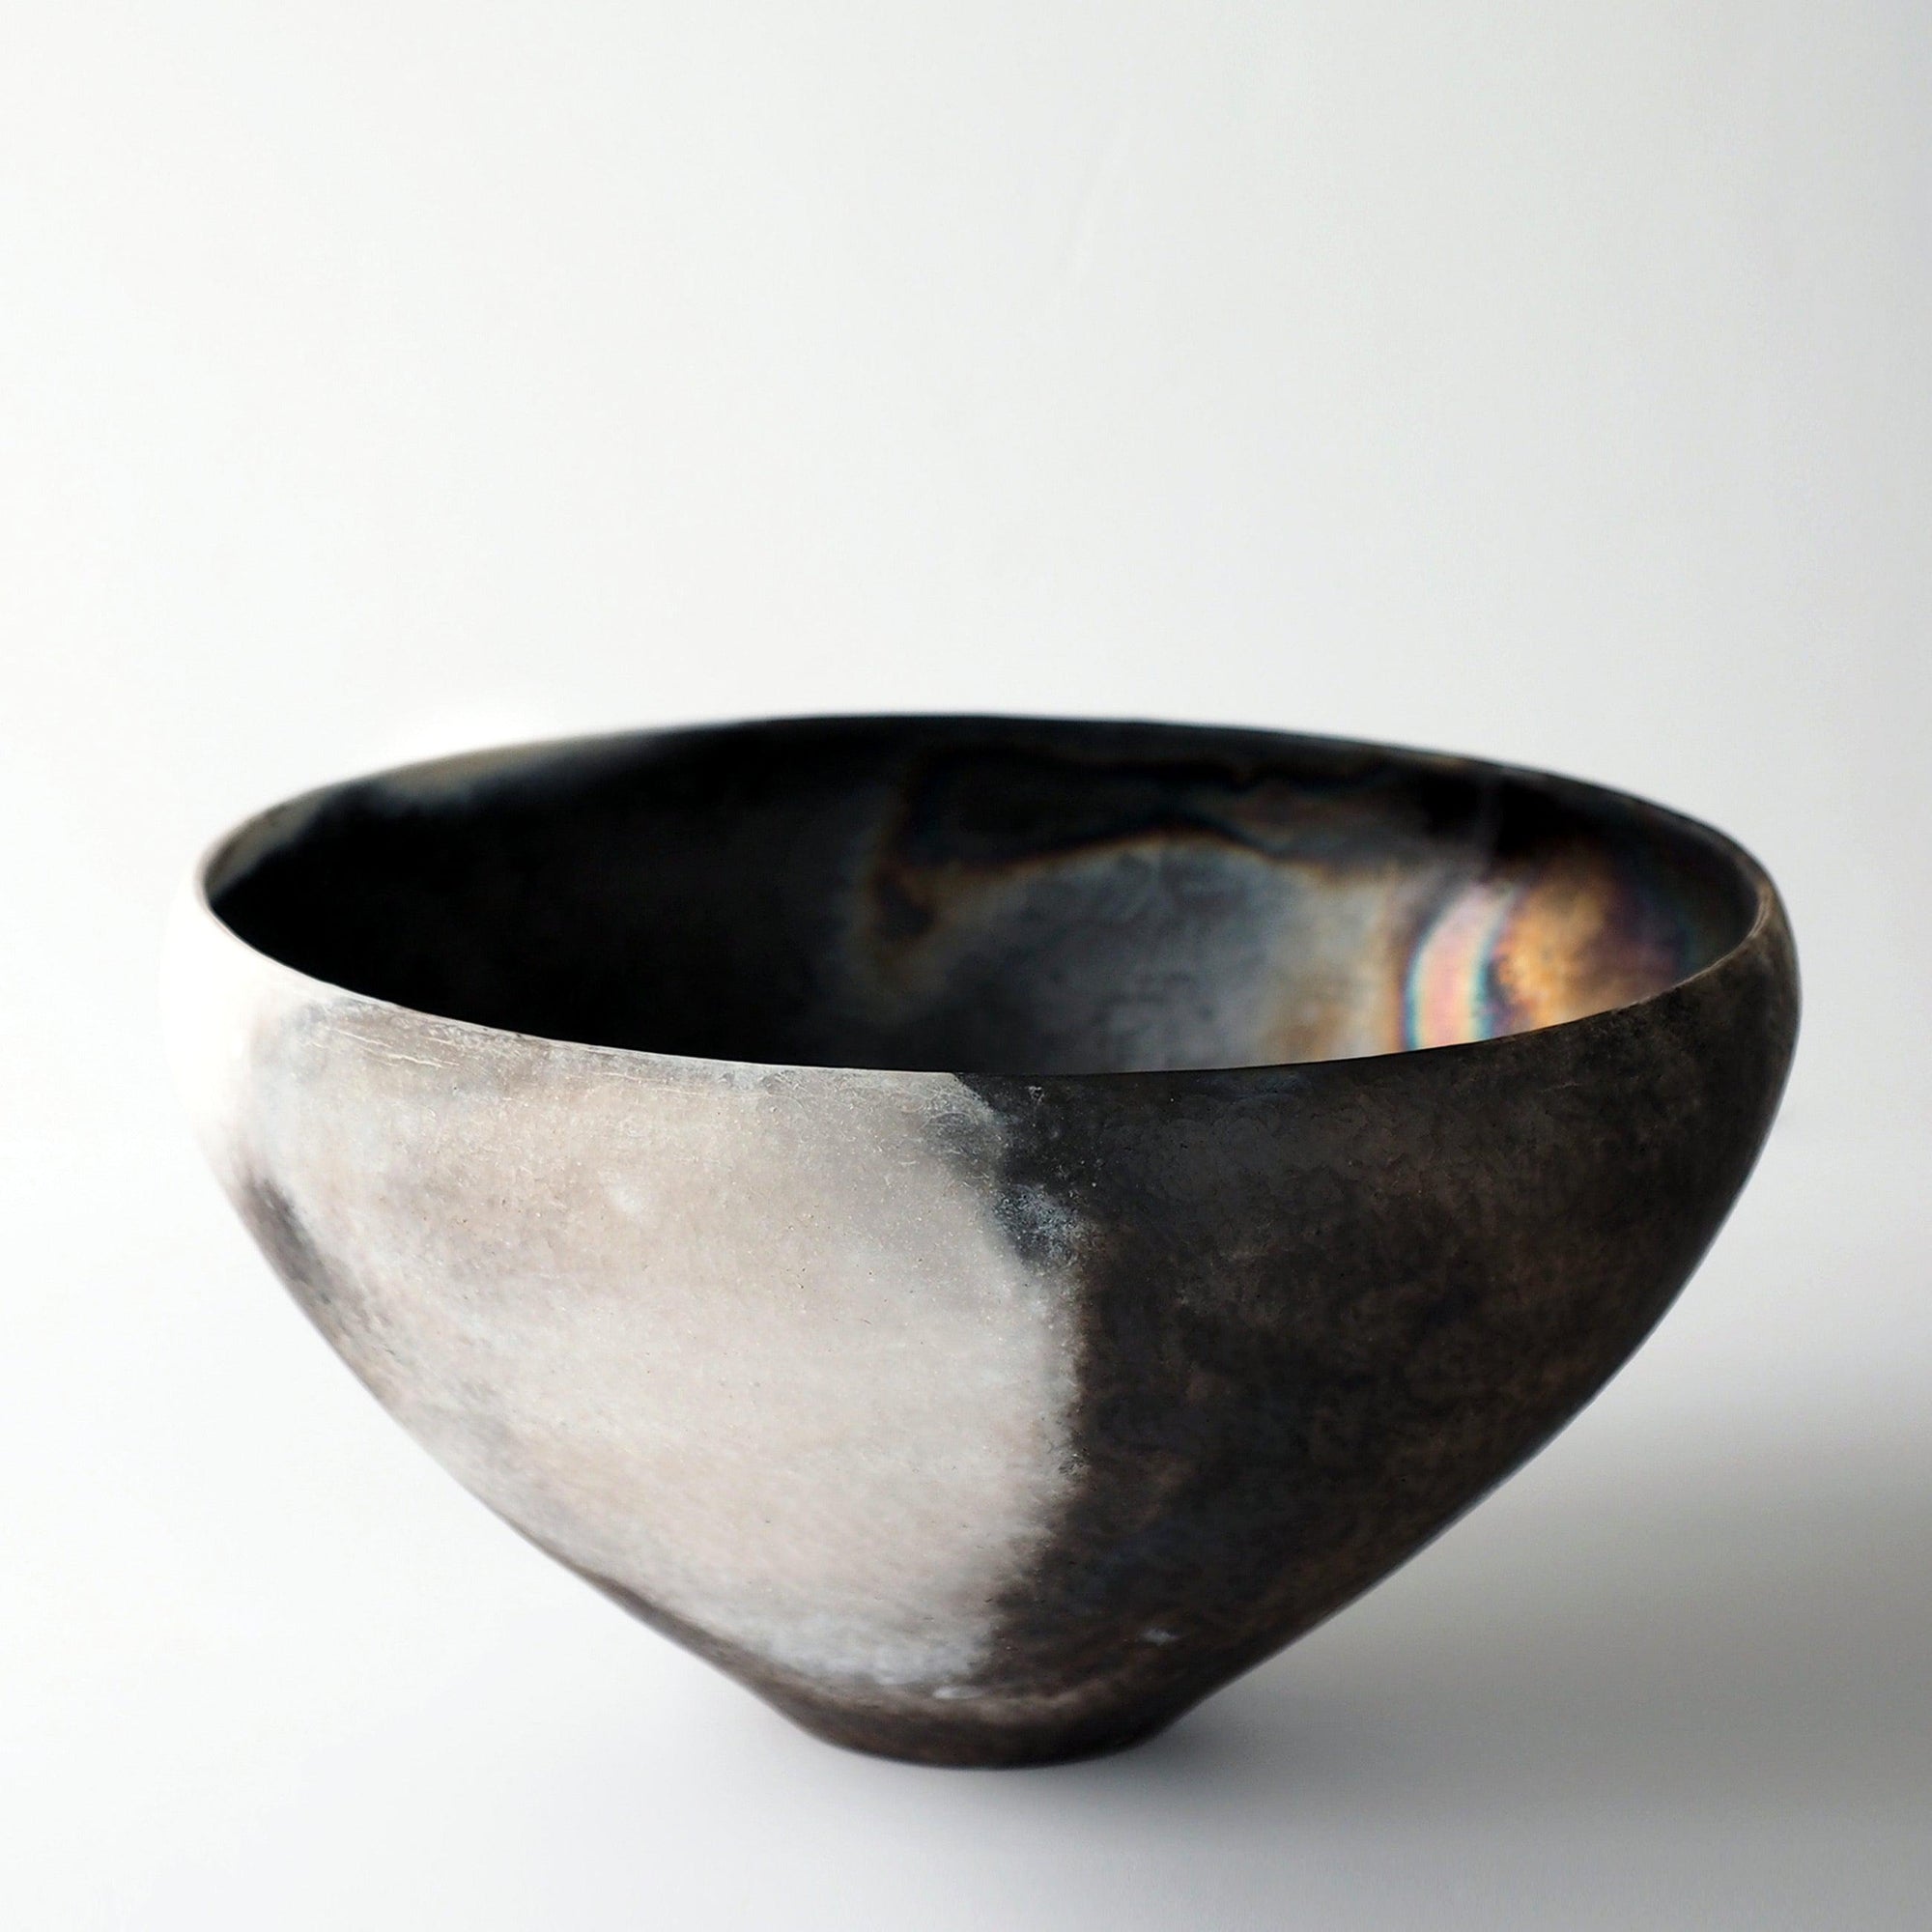 'BJ17 Large Bowl' by Bridget Johnson ceramics available at Padstow Gallery, Cornwall